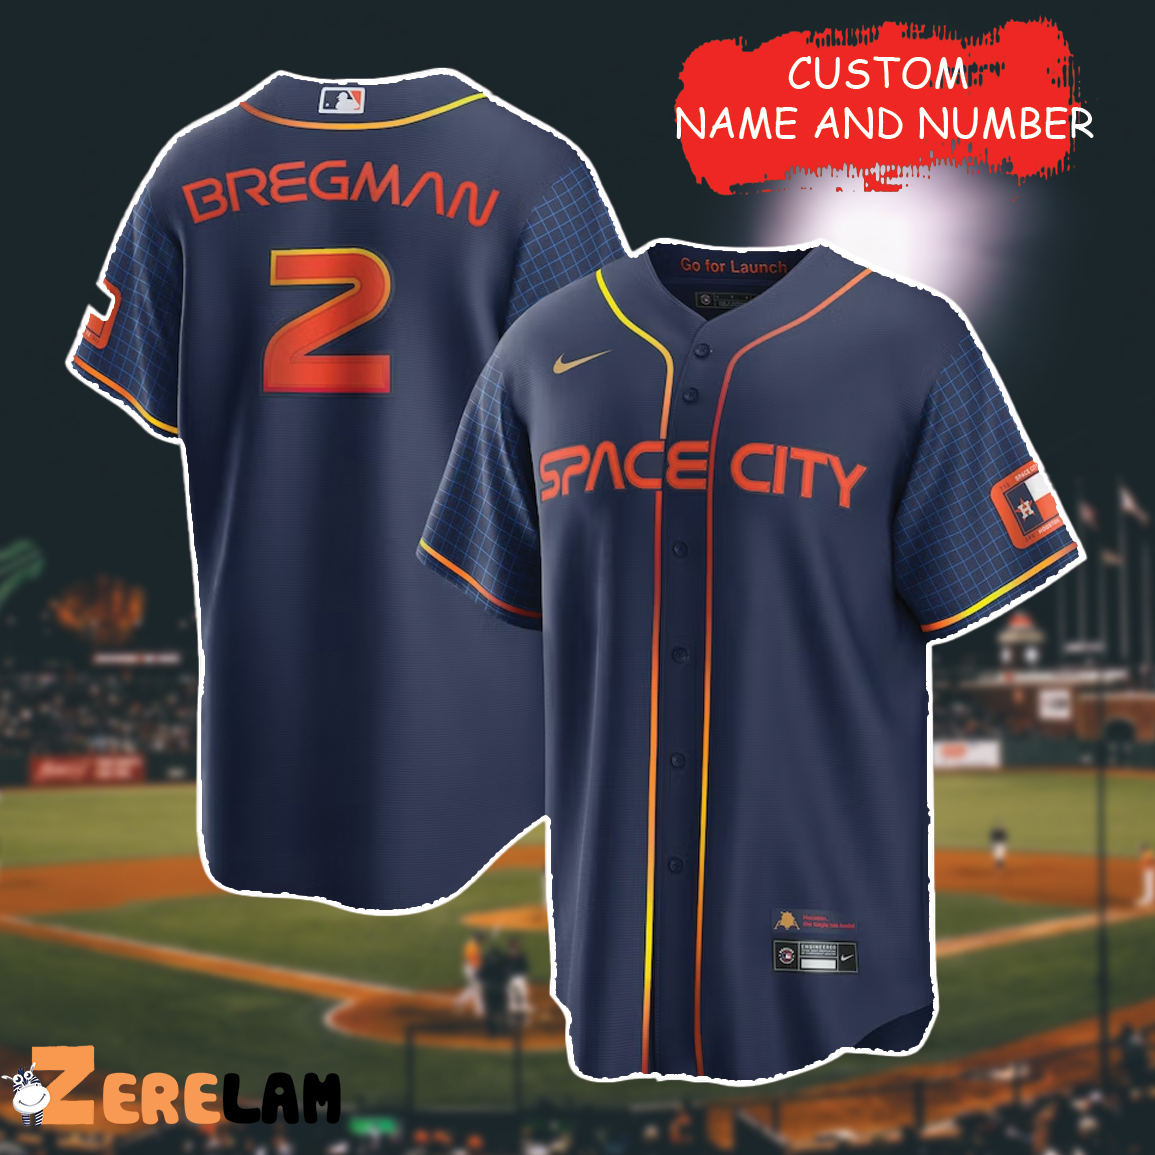 personalized astros jersey